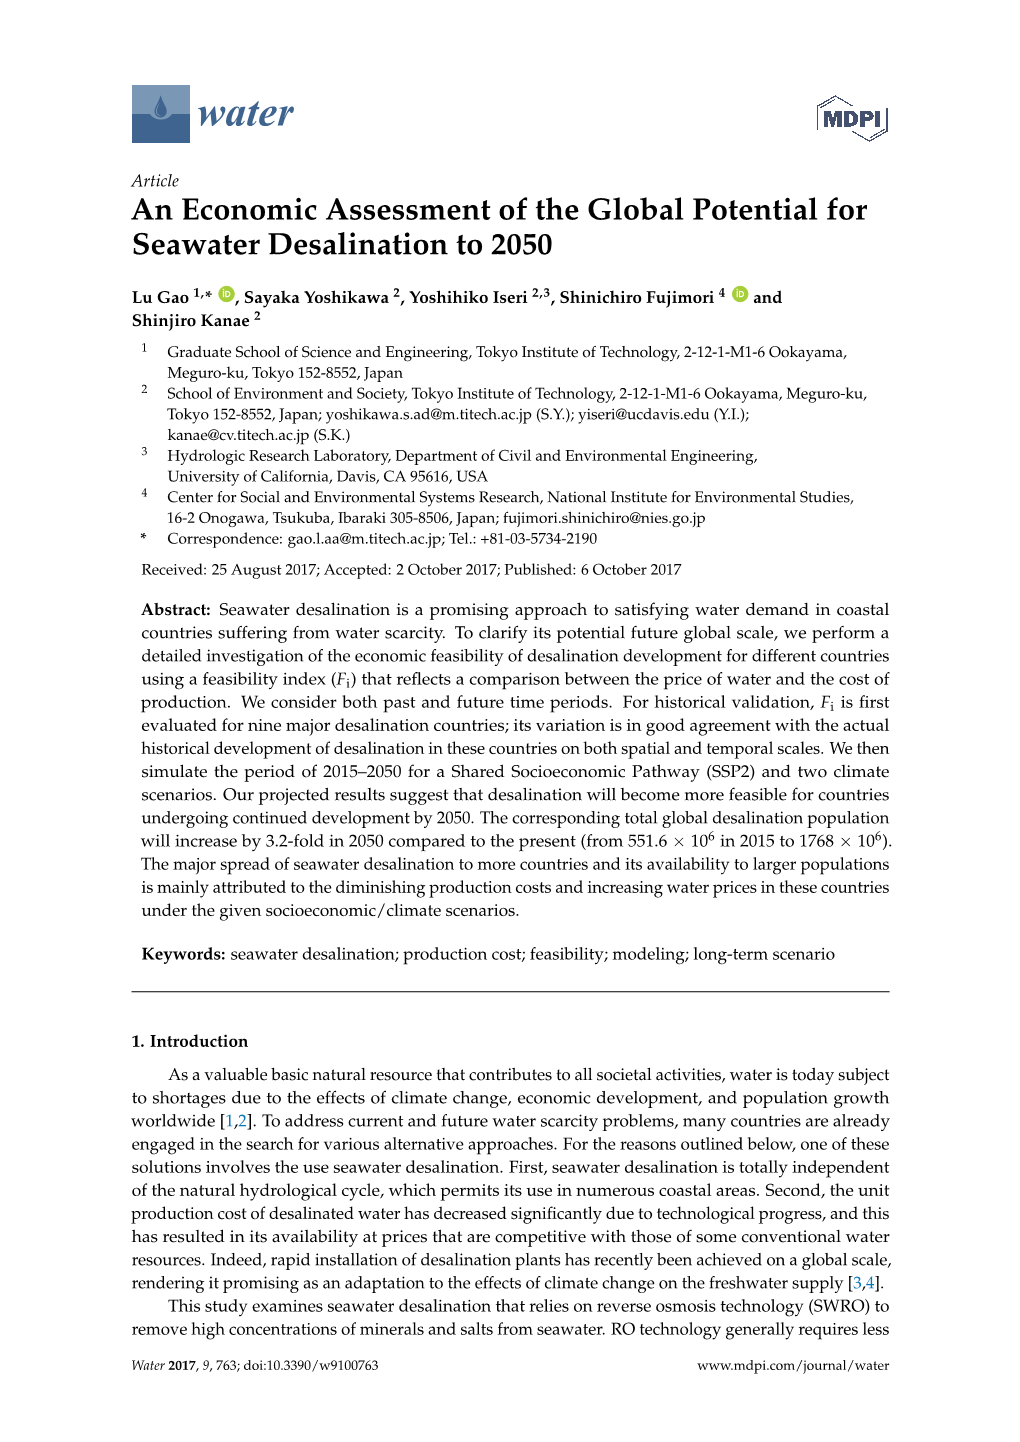 An Economic Assessment of the Global Potential for Seawater Desalination to 2050